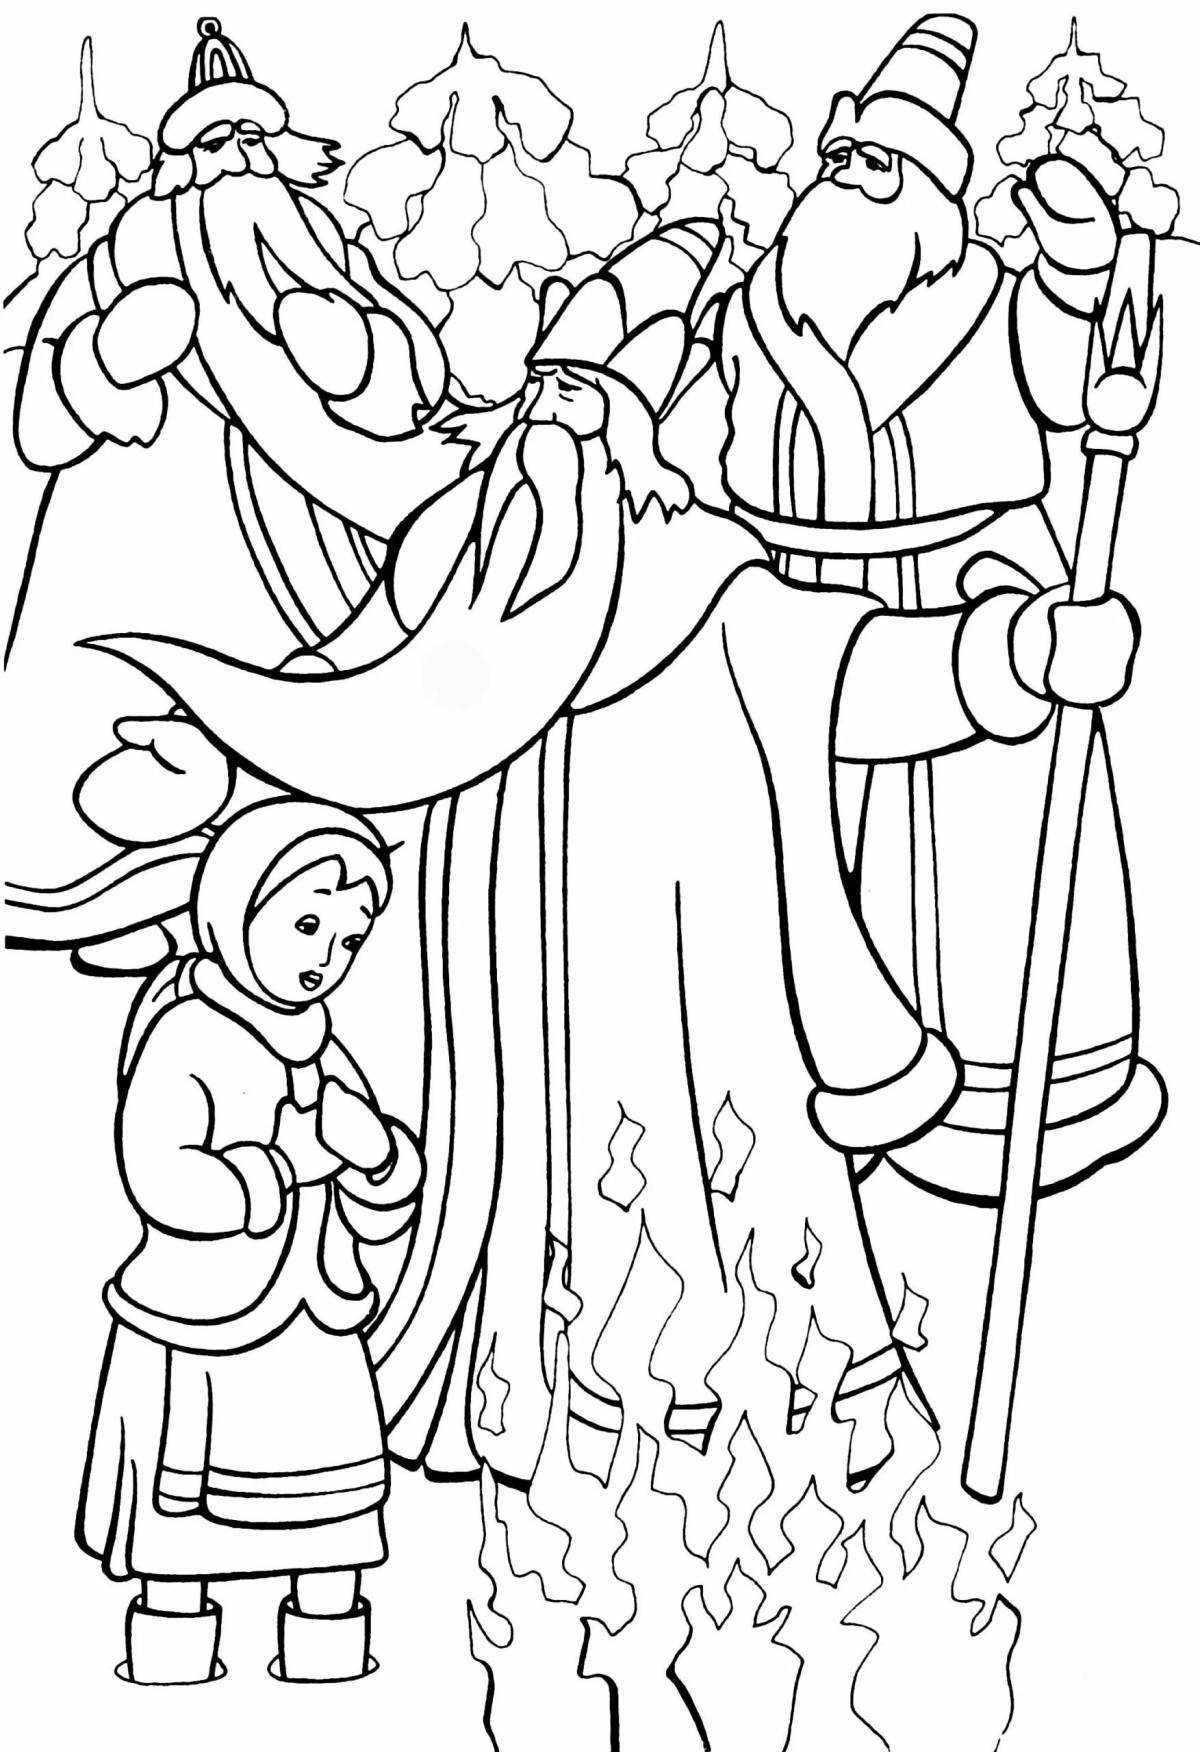 Shine coloring page 12